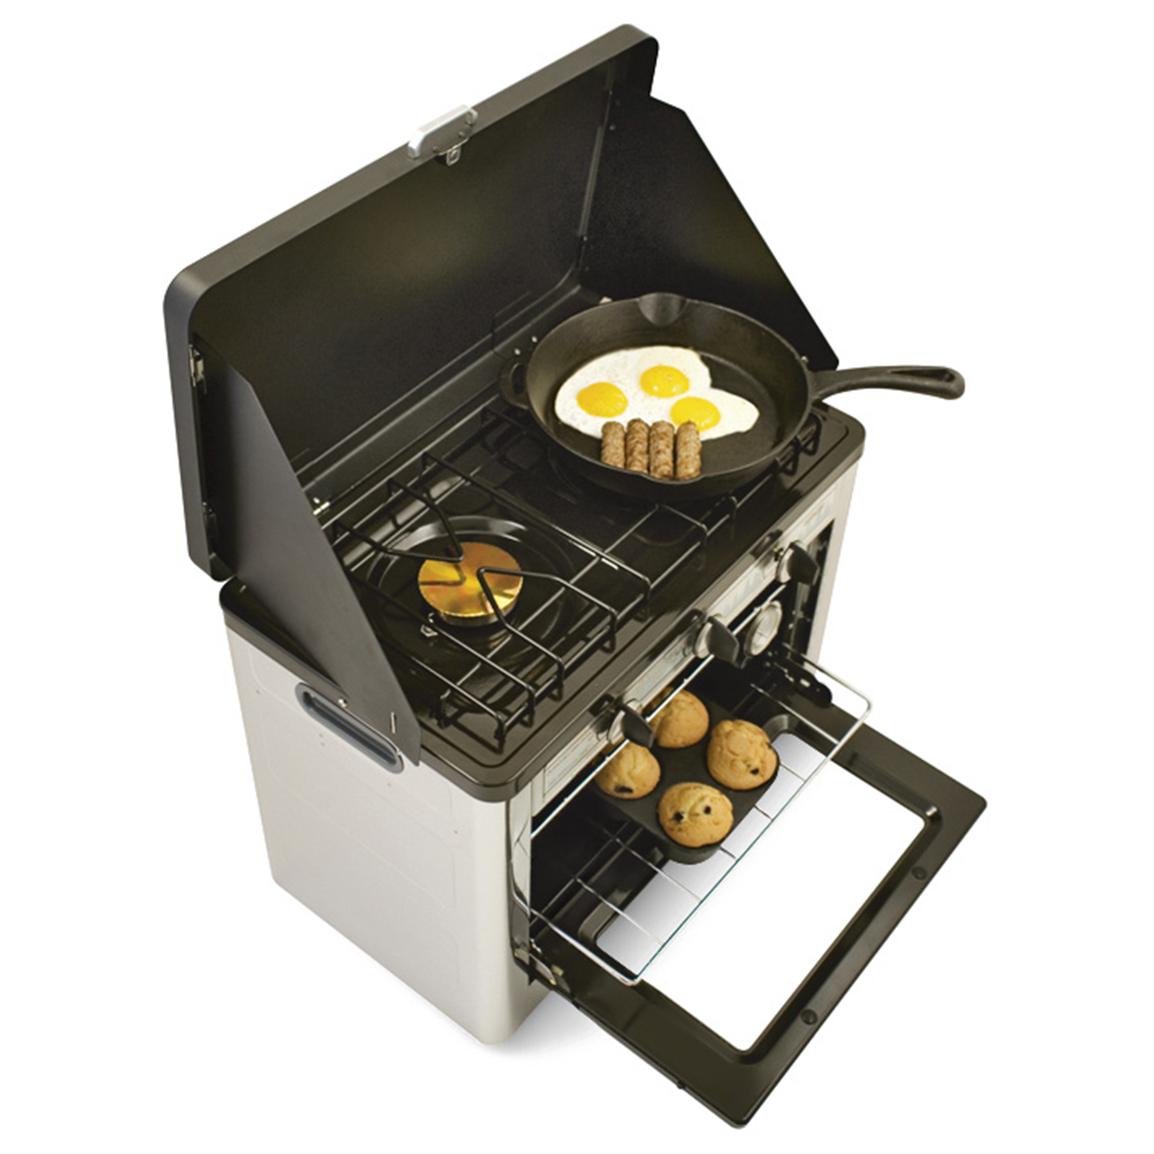 Camp Chef Portable Outdoor Stove Top Oven 134960 Stoves At